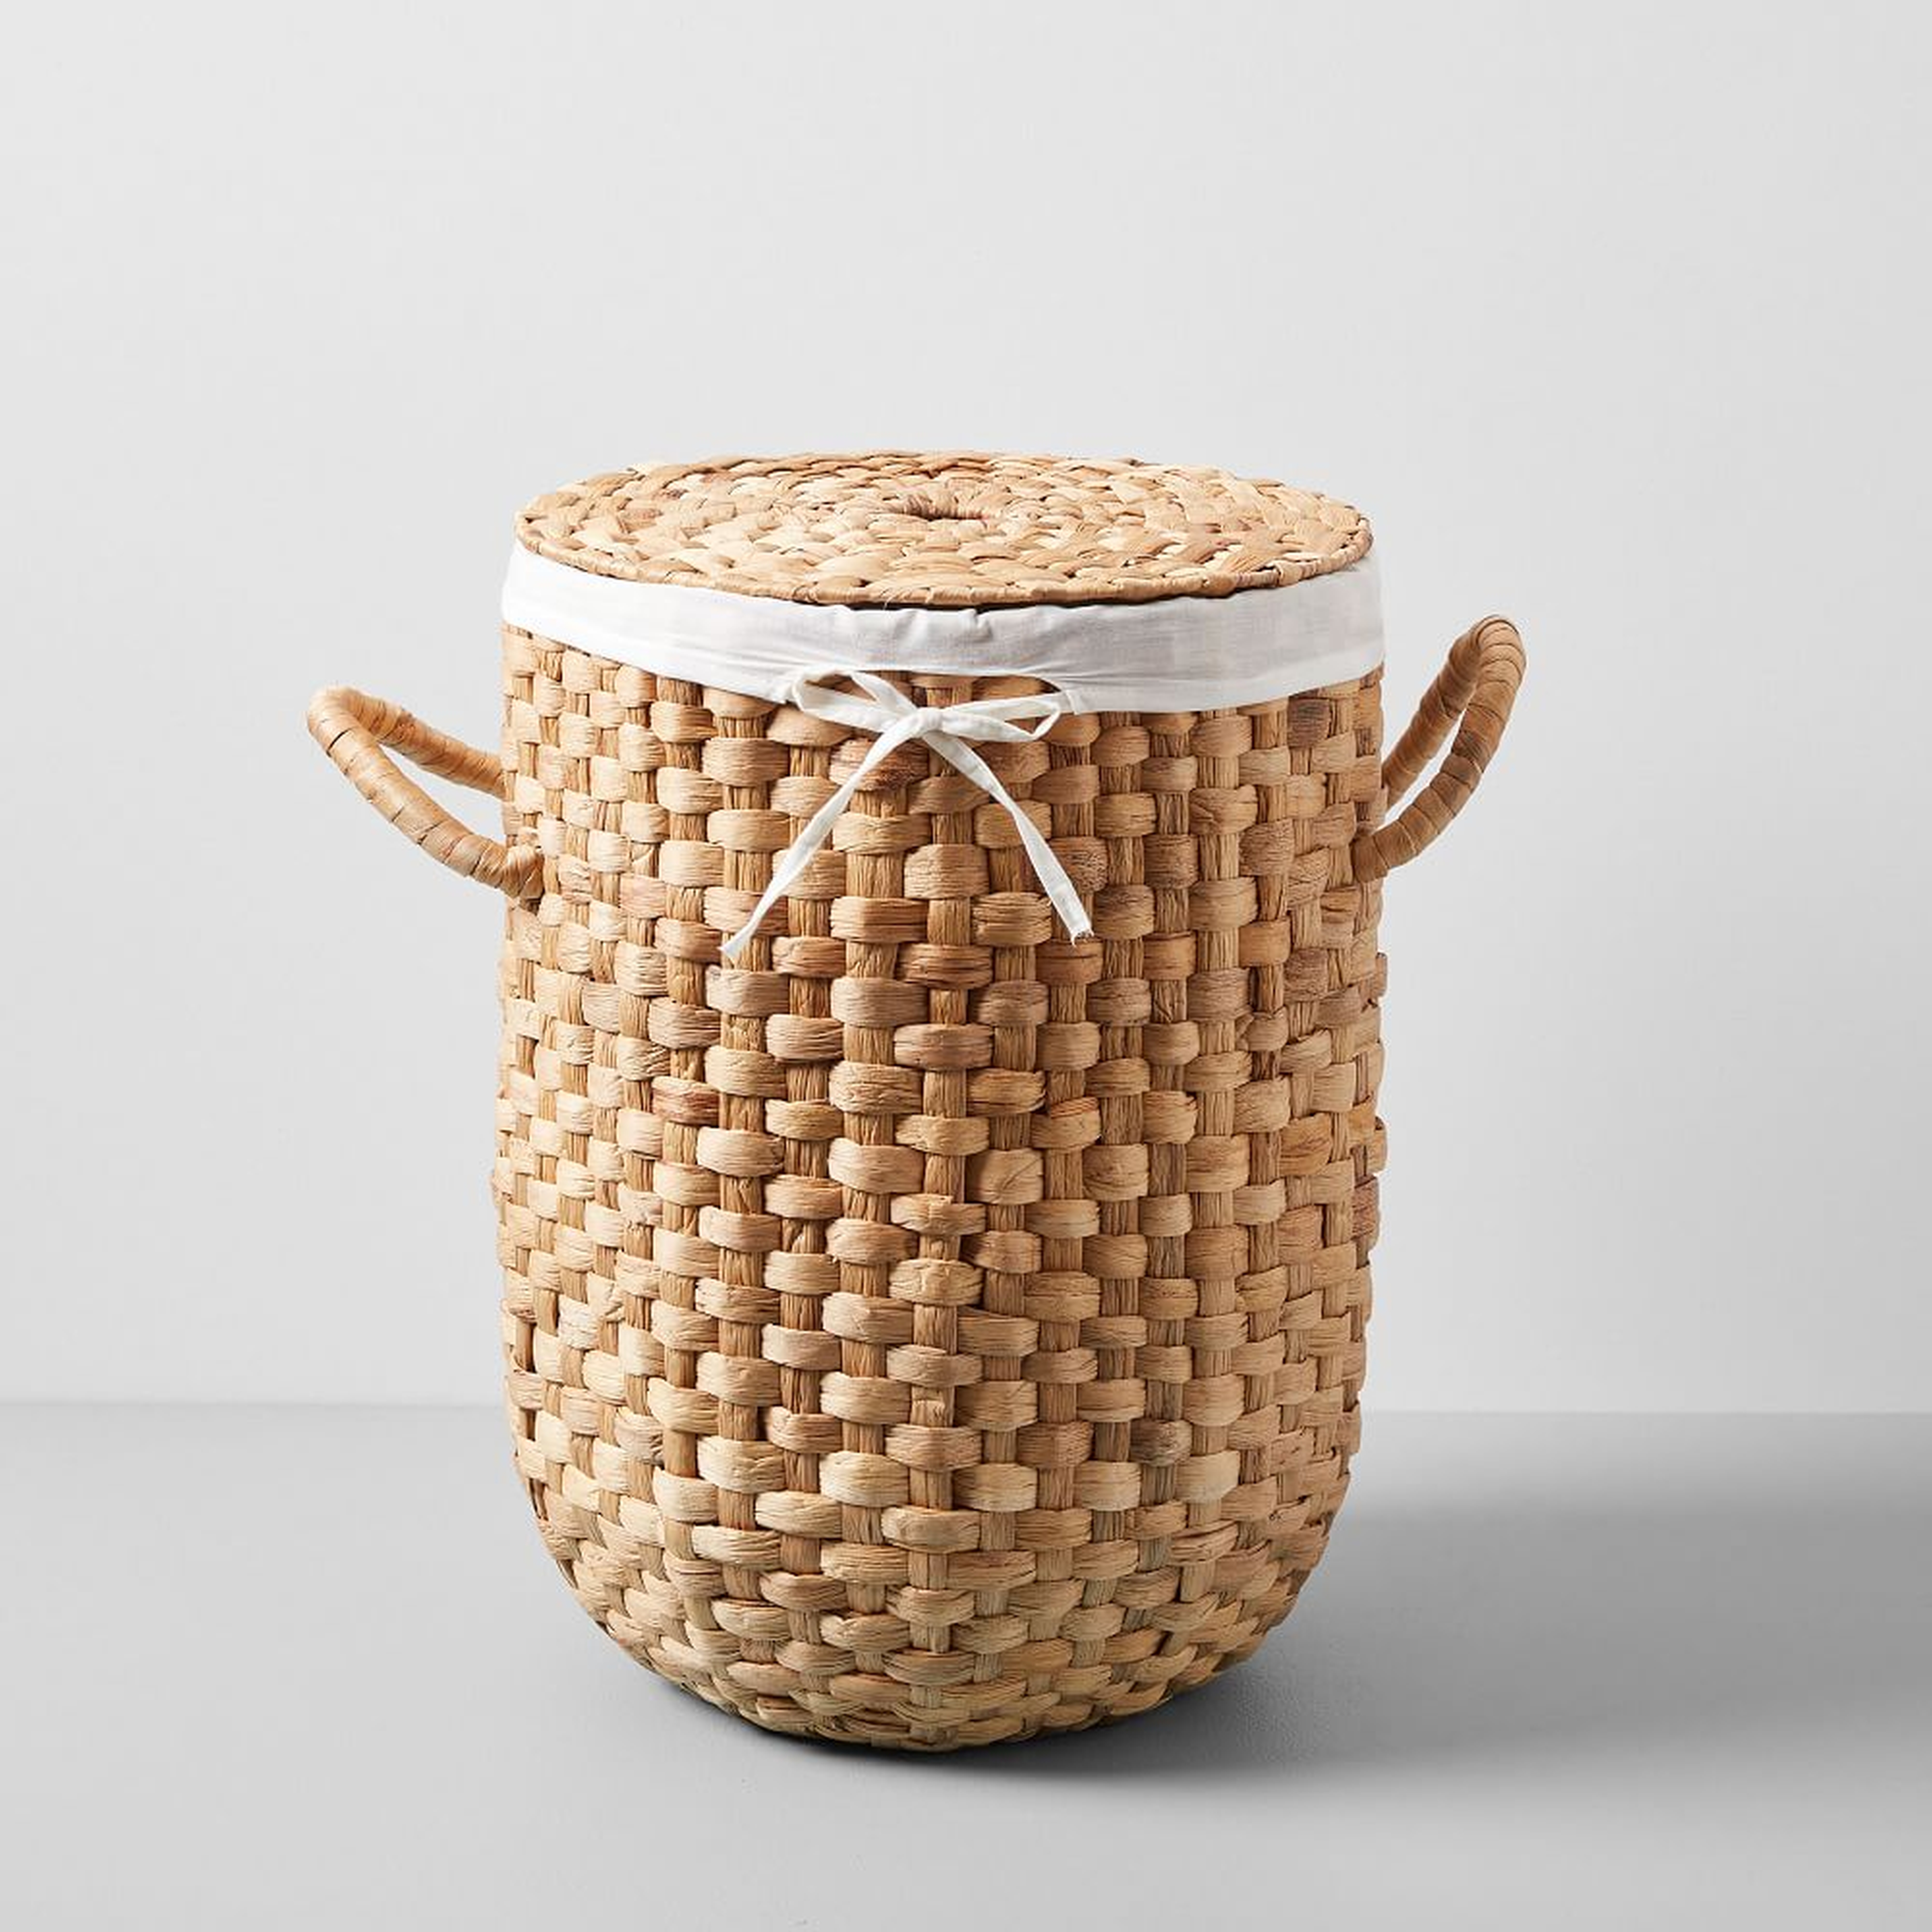 Round Weave Laundry Basket,Small, Natural - West Elm